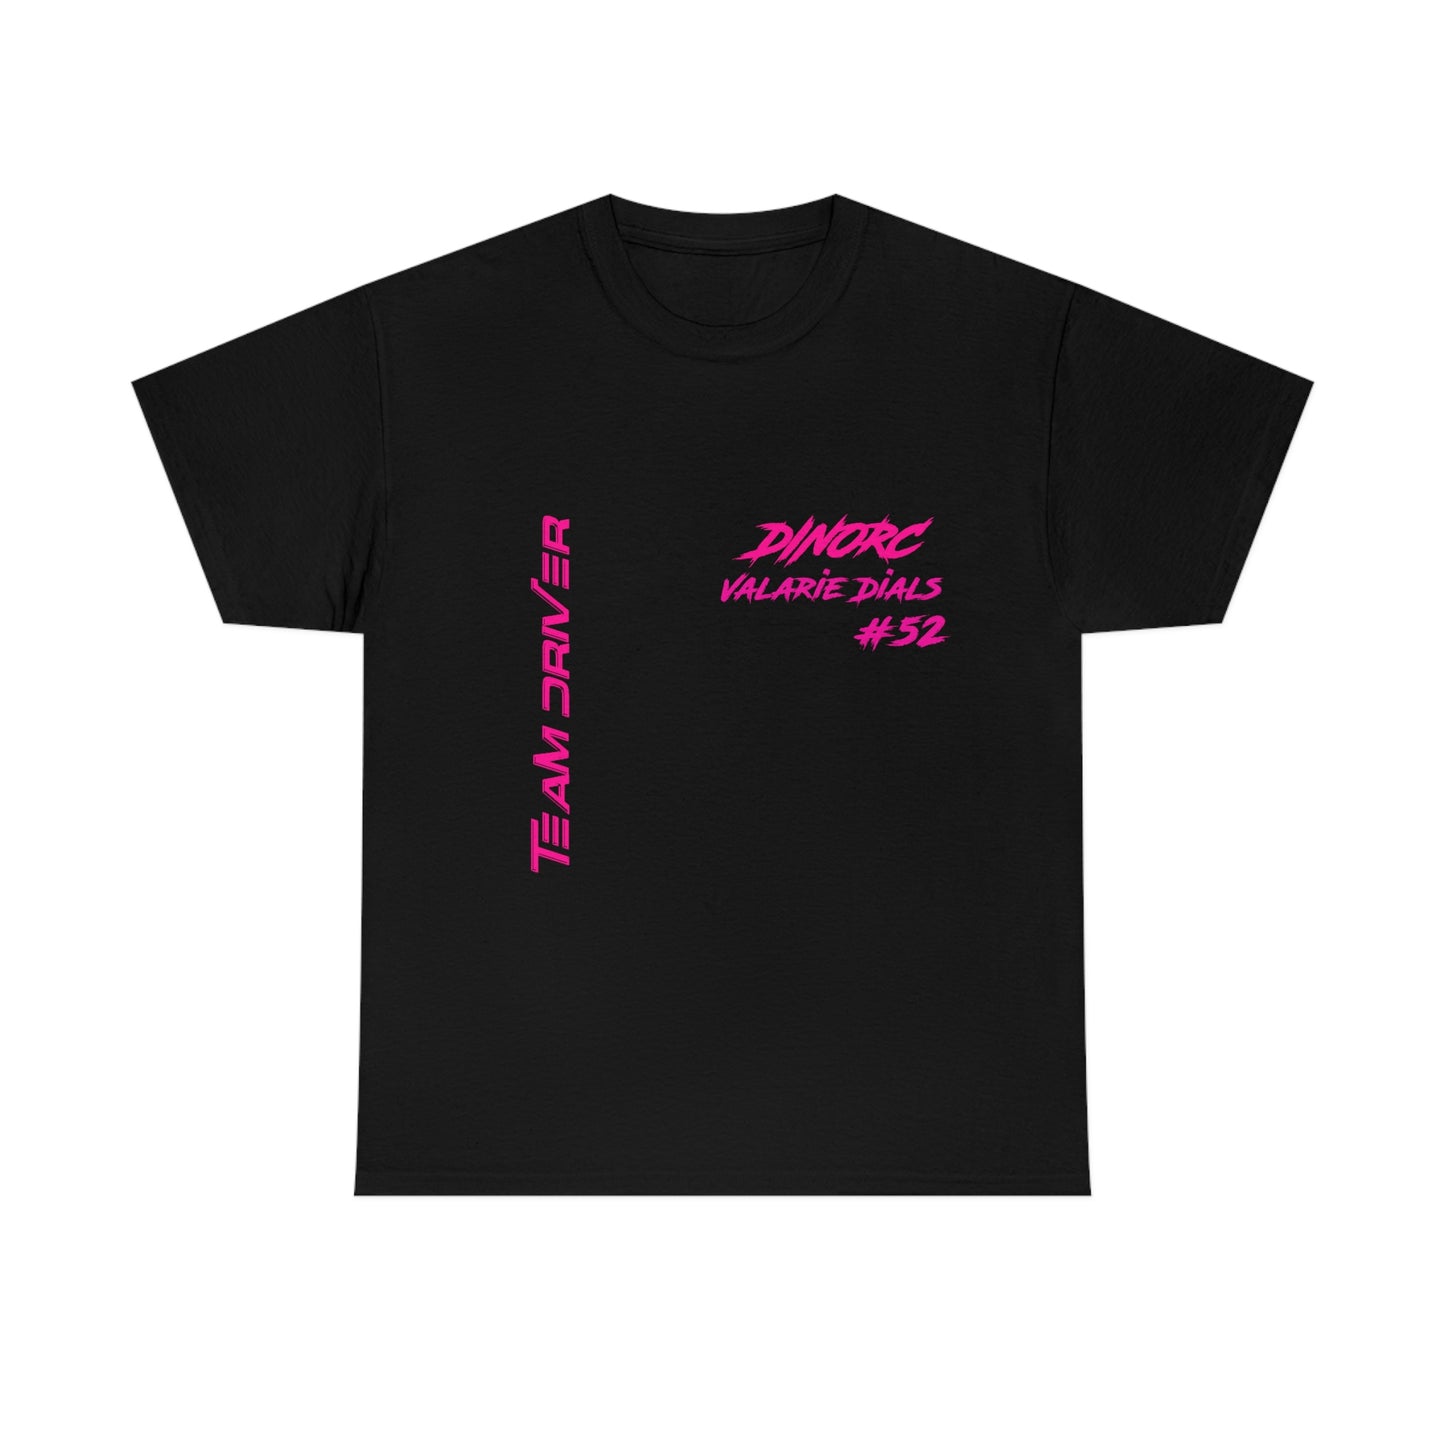 Team Driver Valarie Dials Dino's Divas Front and Back DinoRc Logo T-Shirt S-5x 5 colors